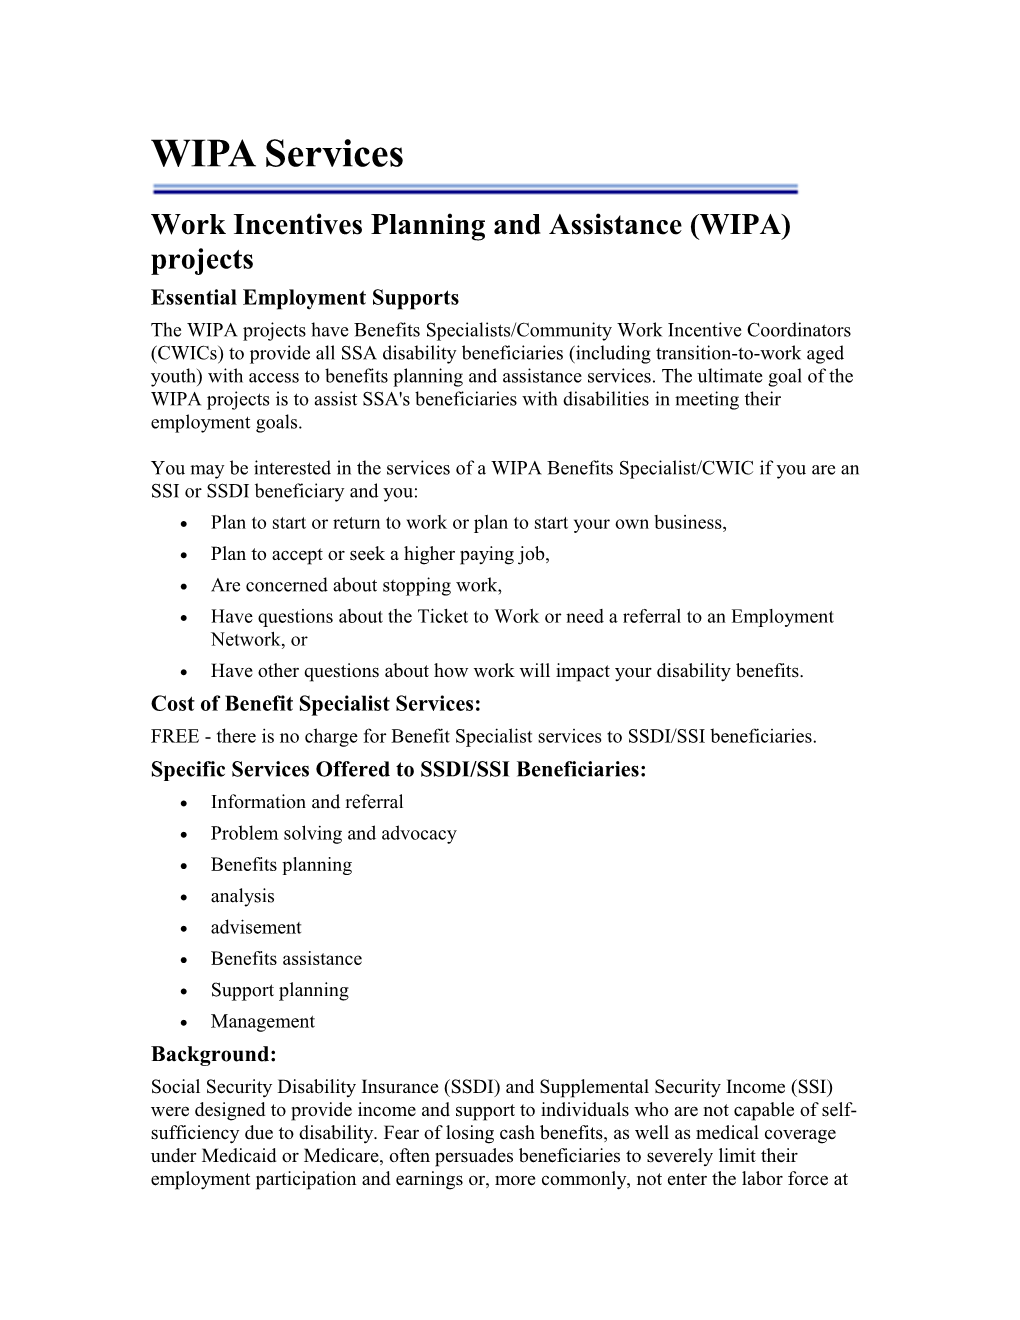 Work Incentives Planning and Assistance (WIPA) Projects